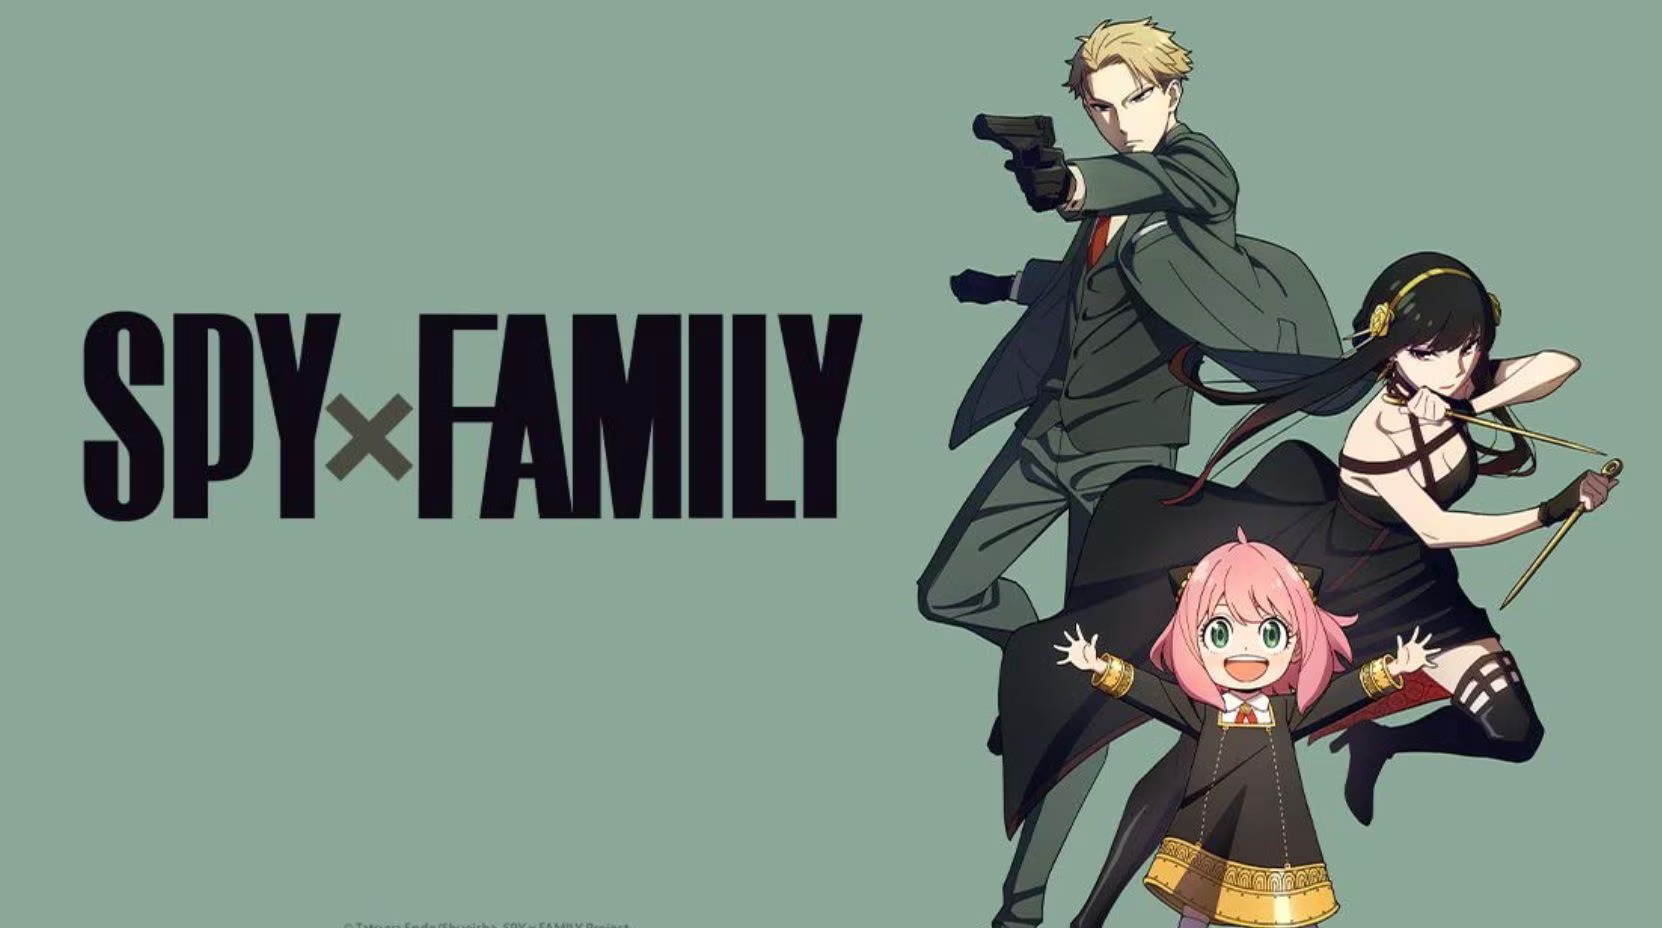 SPY x FAMILY: What To Expect From SPY x FAMILY Season 2 and the Upcoming Movie